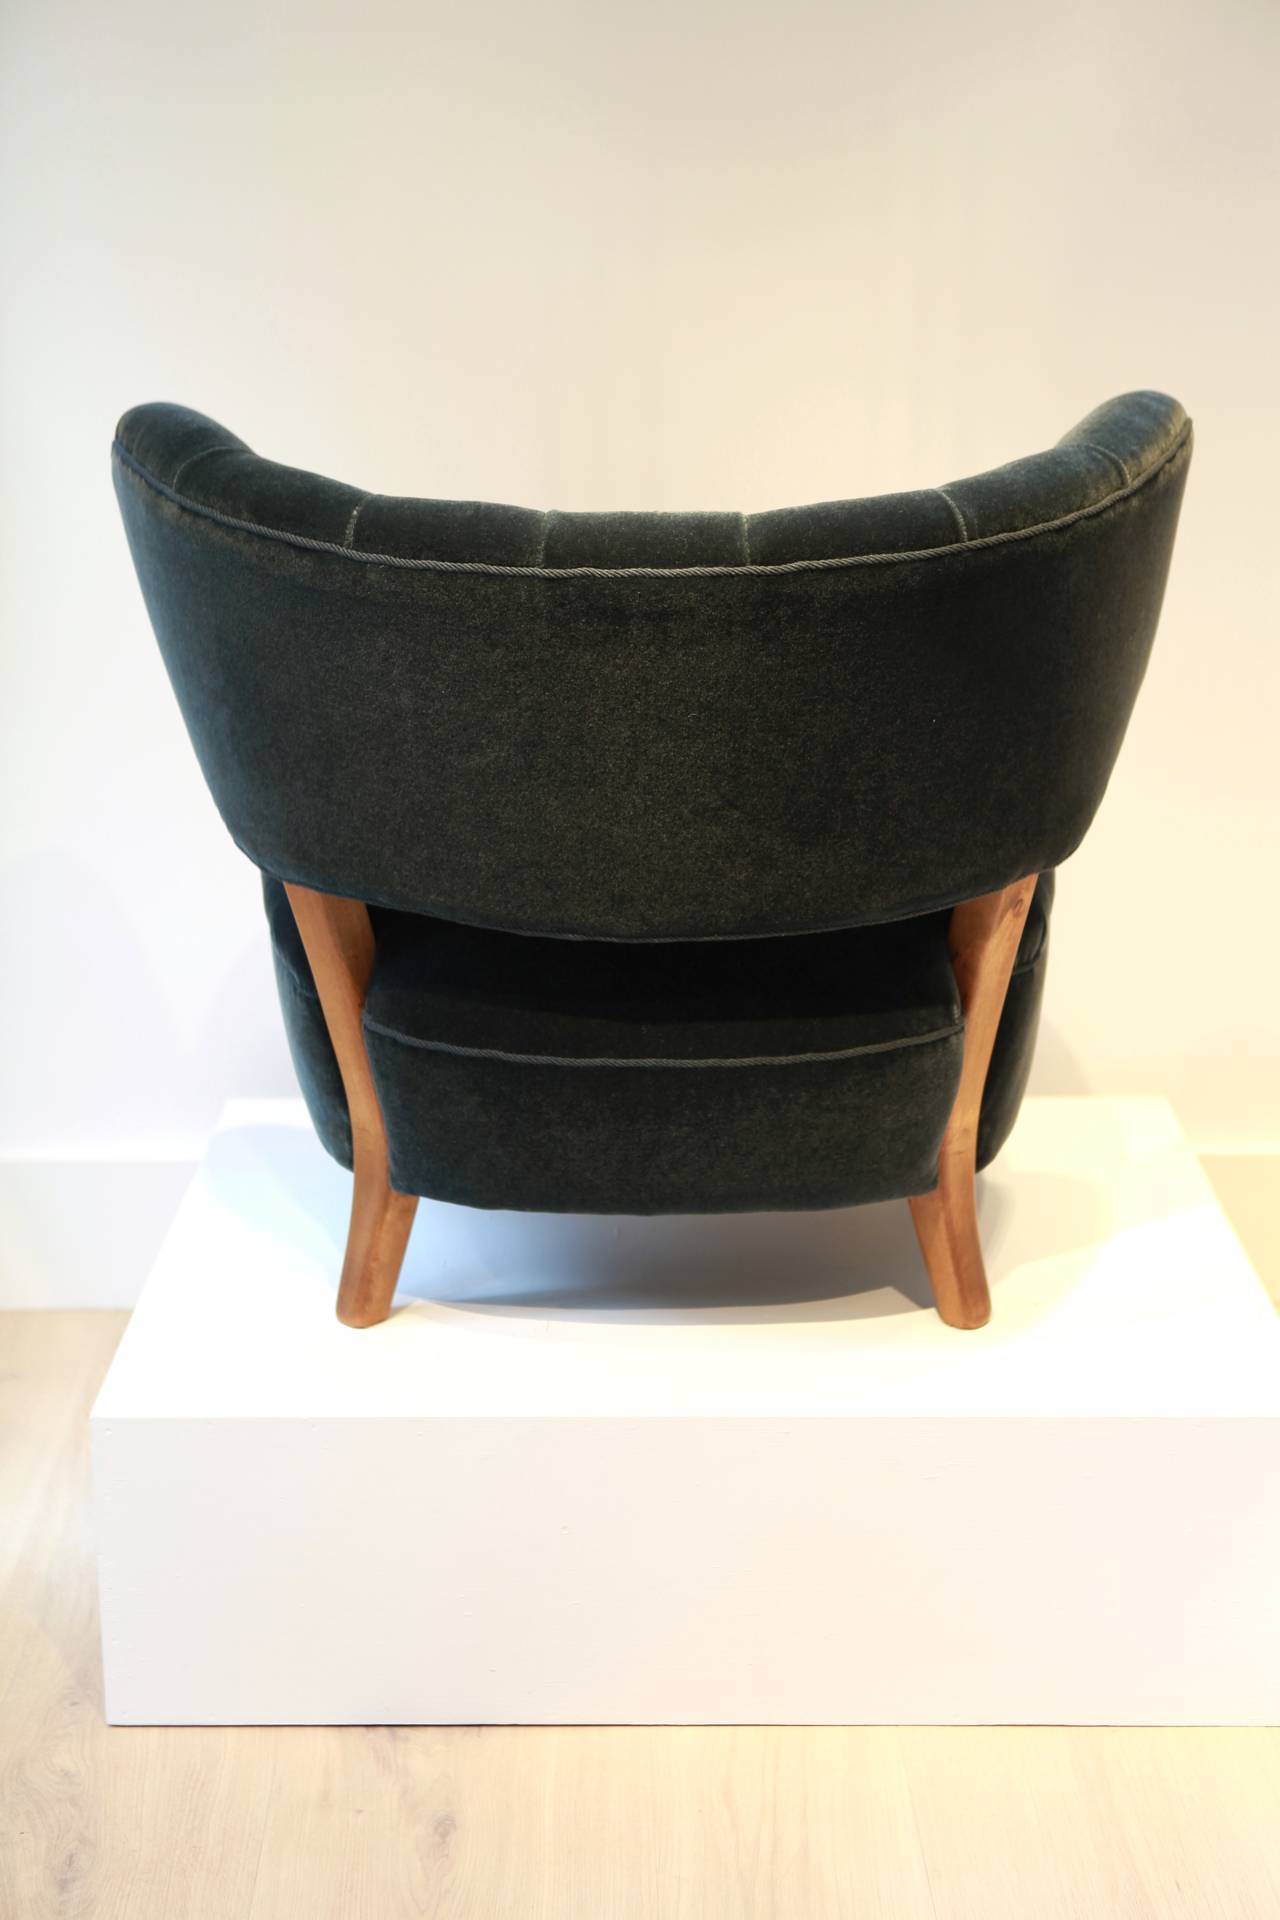 Neoclassical Revival Otto Schulz Easy Chair Fo Boet, Sweden, 1930s